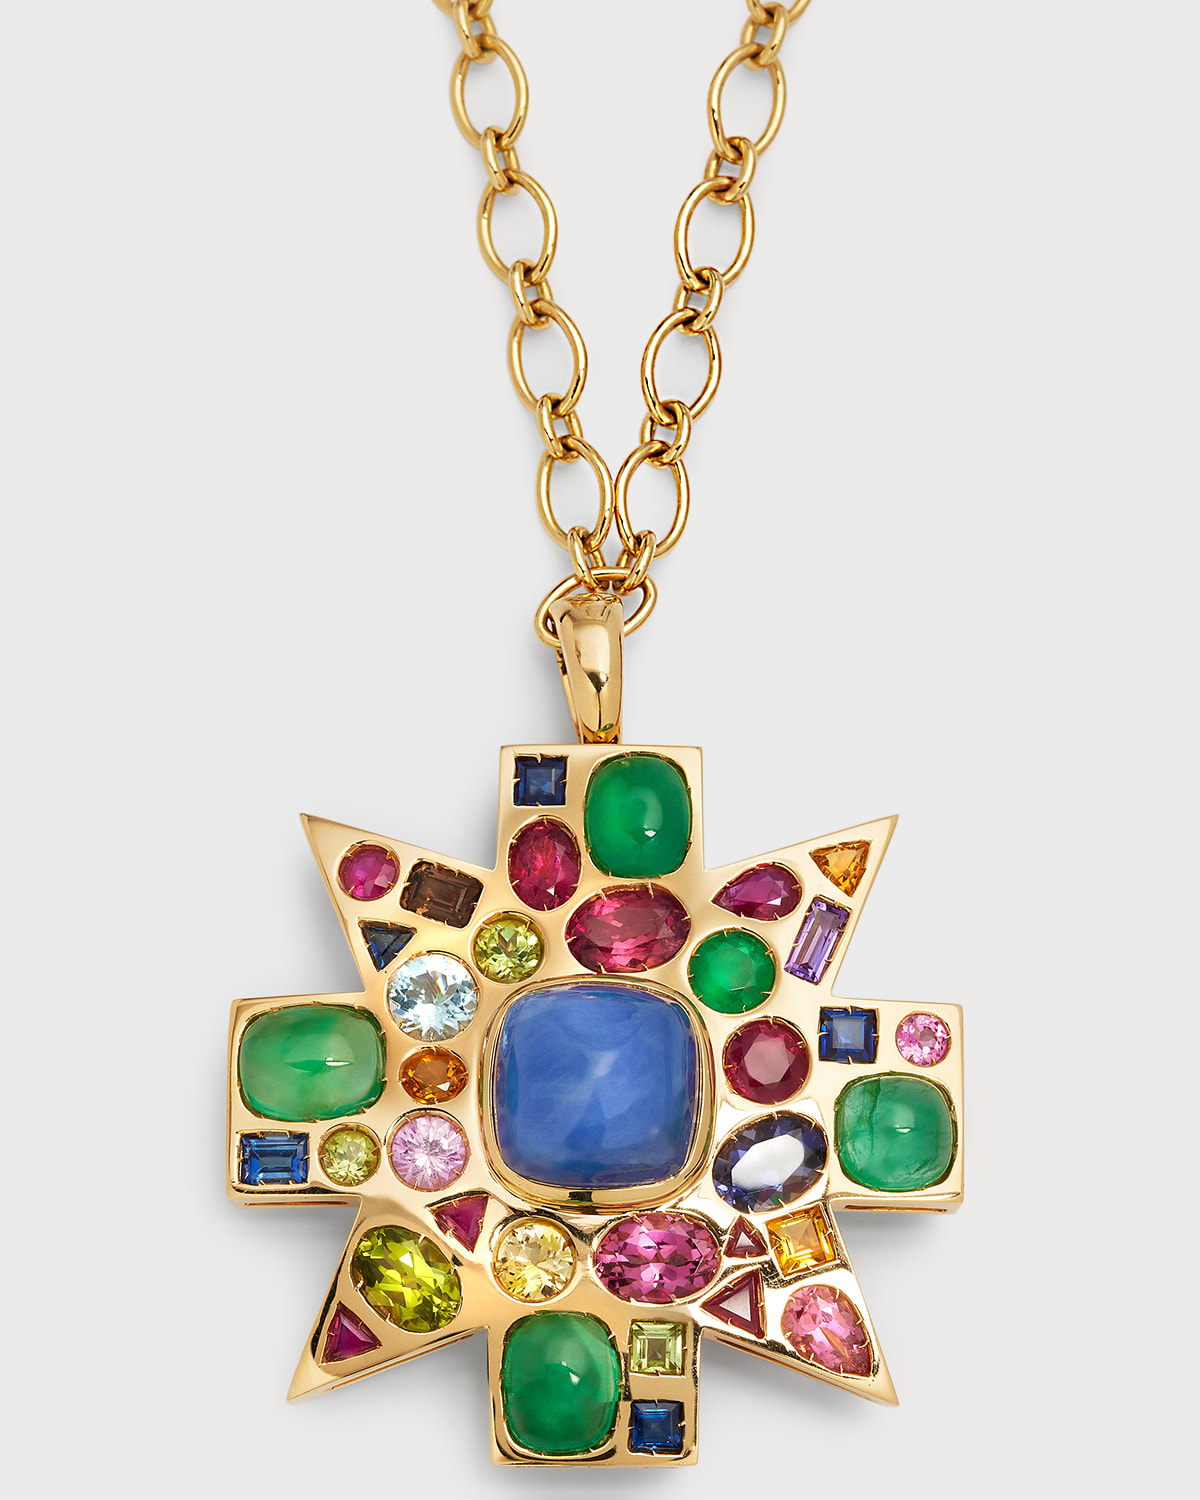 VERDURA 18K SAPPHIRE, EMERALD AND COLORED STONE "BYZANTINE" PENDANT BROOCH WITH NECKLACE CHAIN